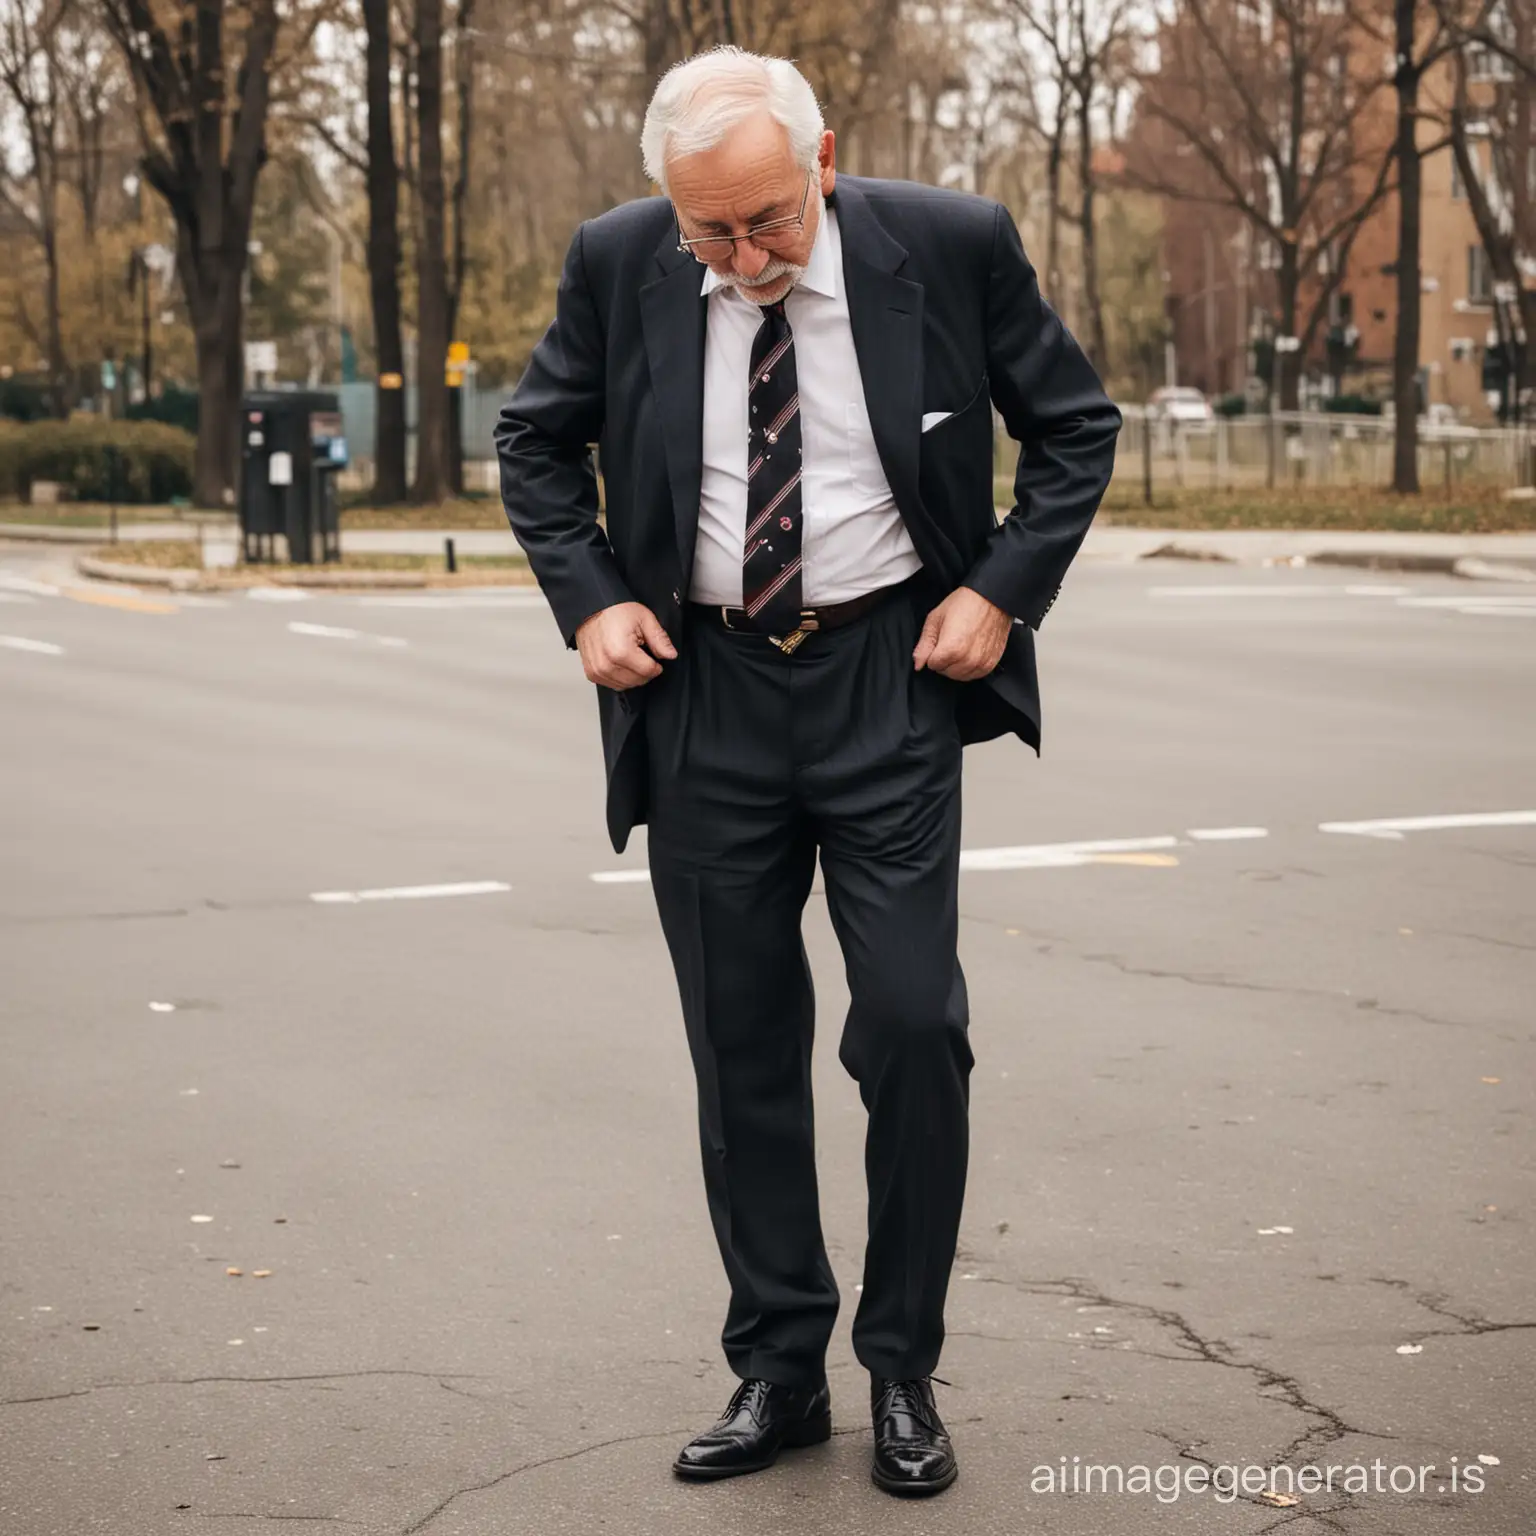 A well-dressed grandpa is pissing in his dress pants.